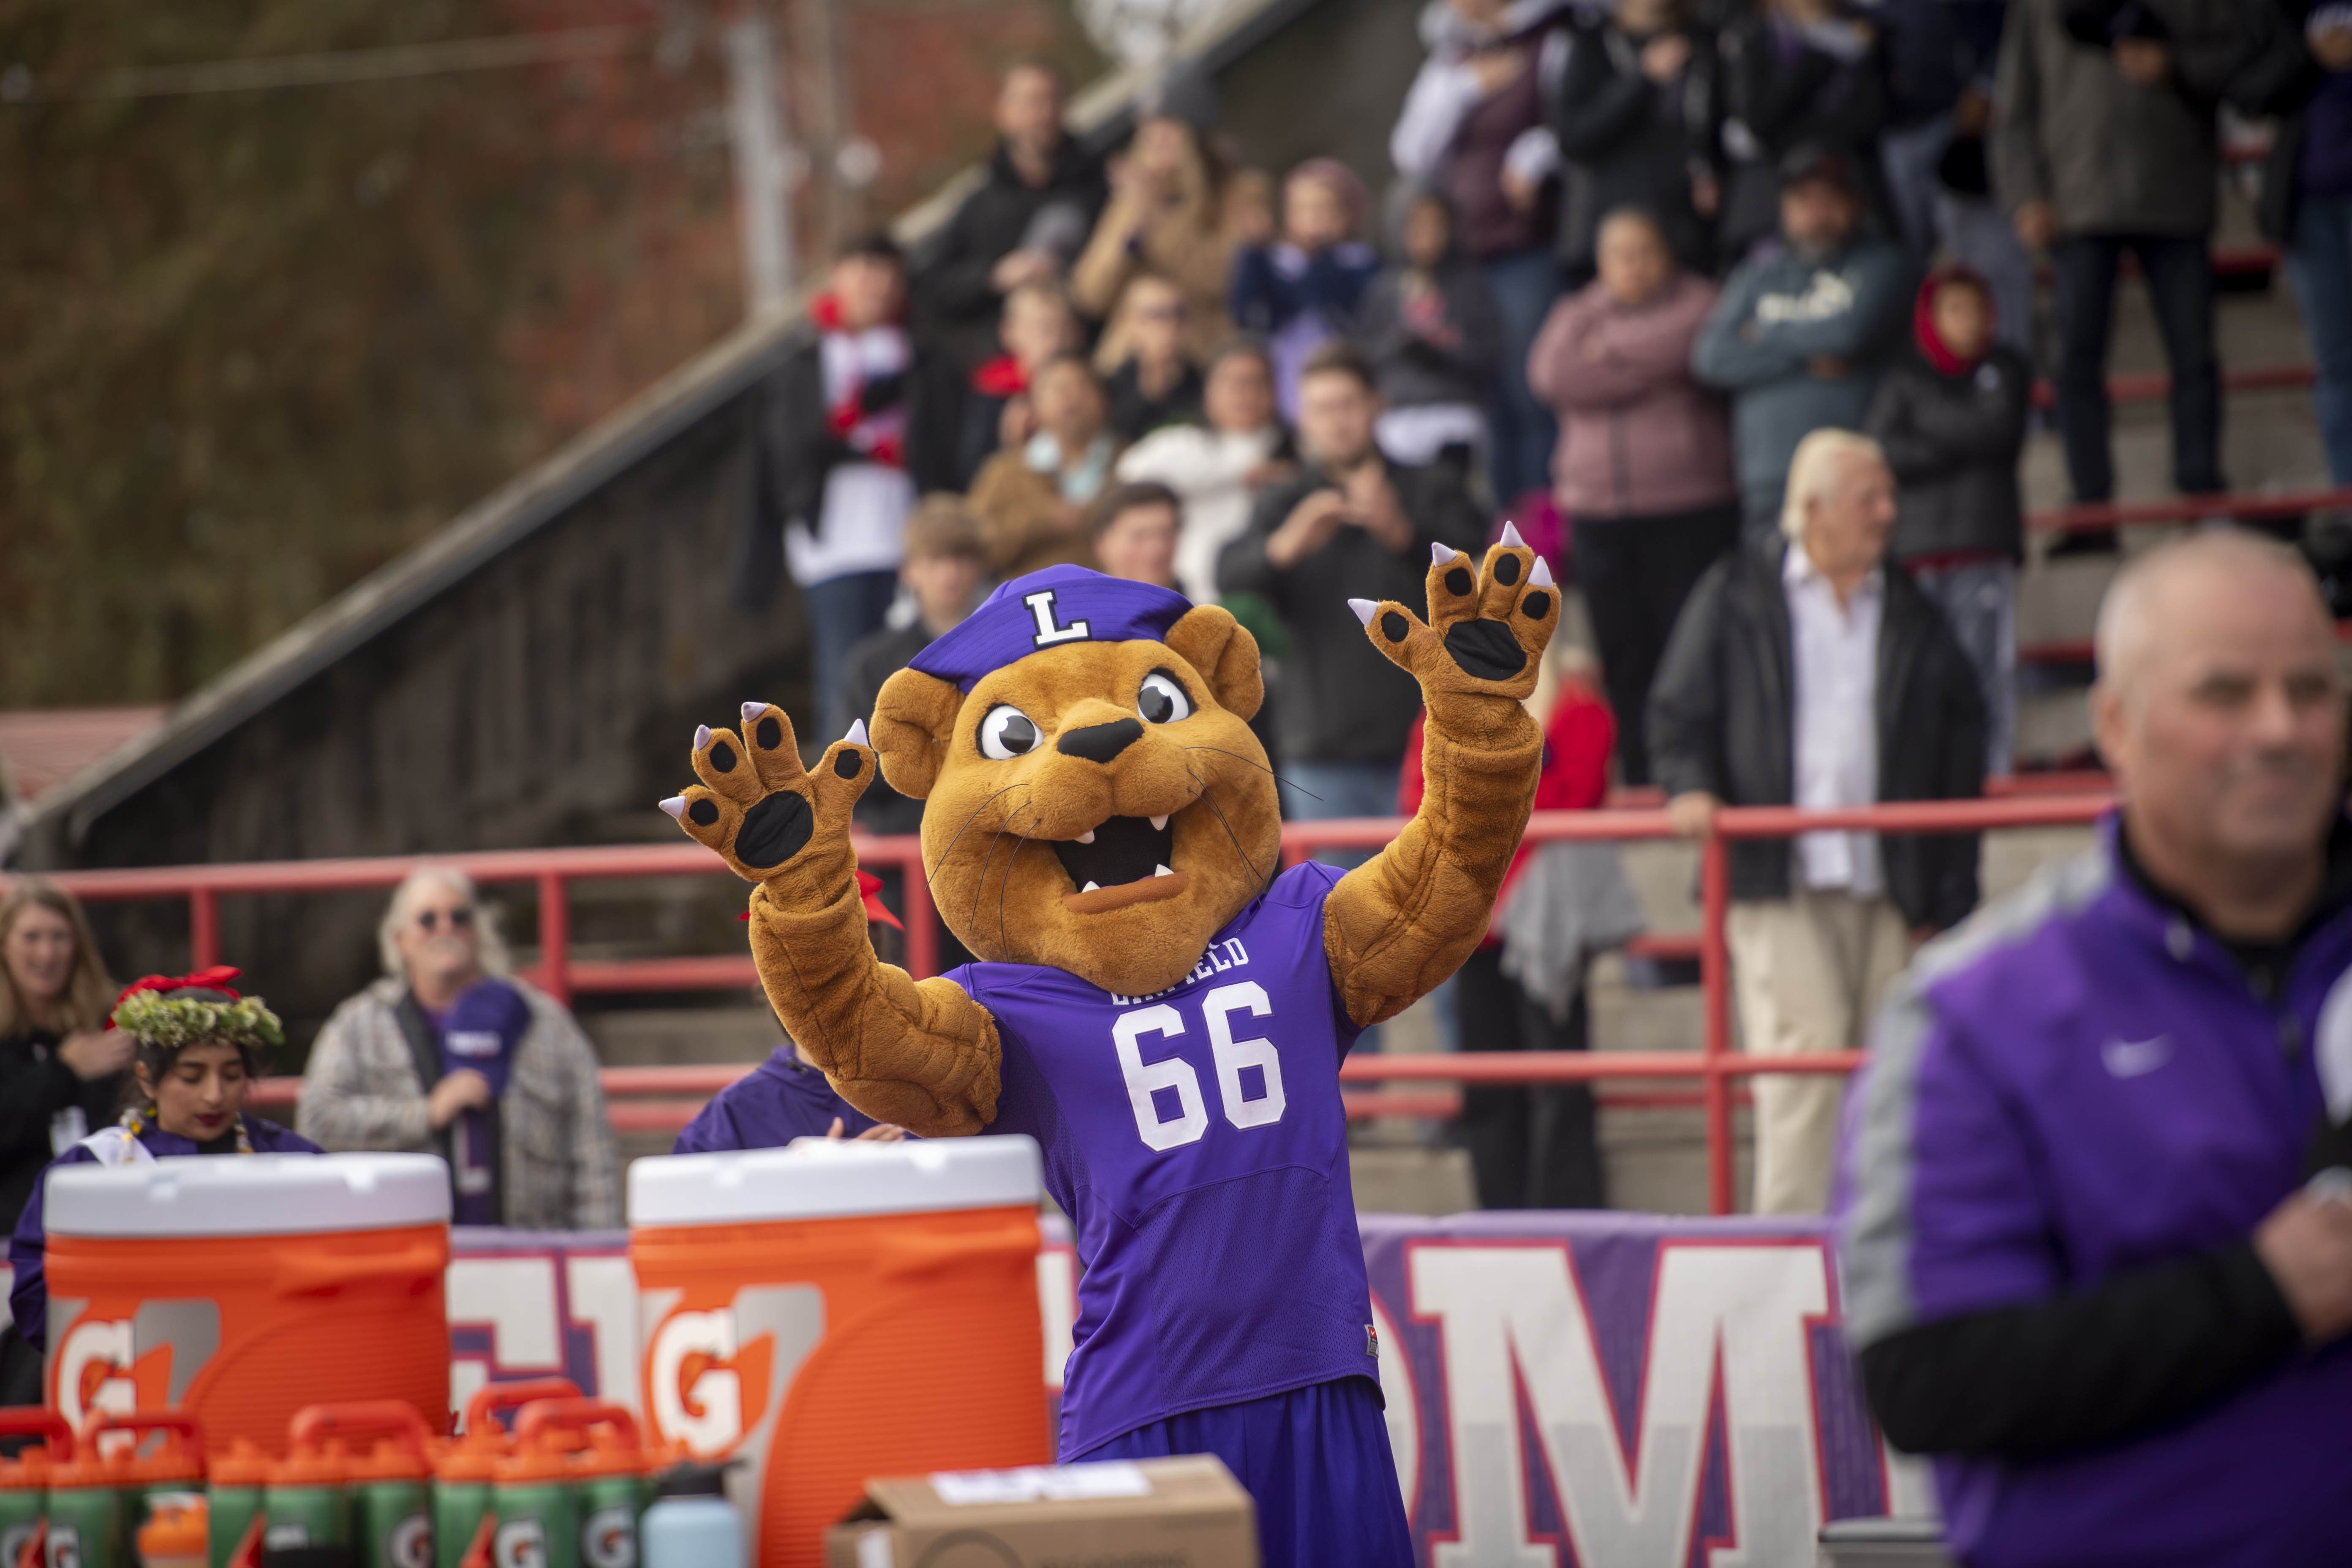 Mack the Wildcat celebrating at a football game